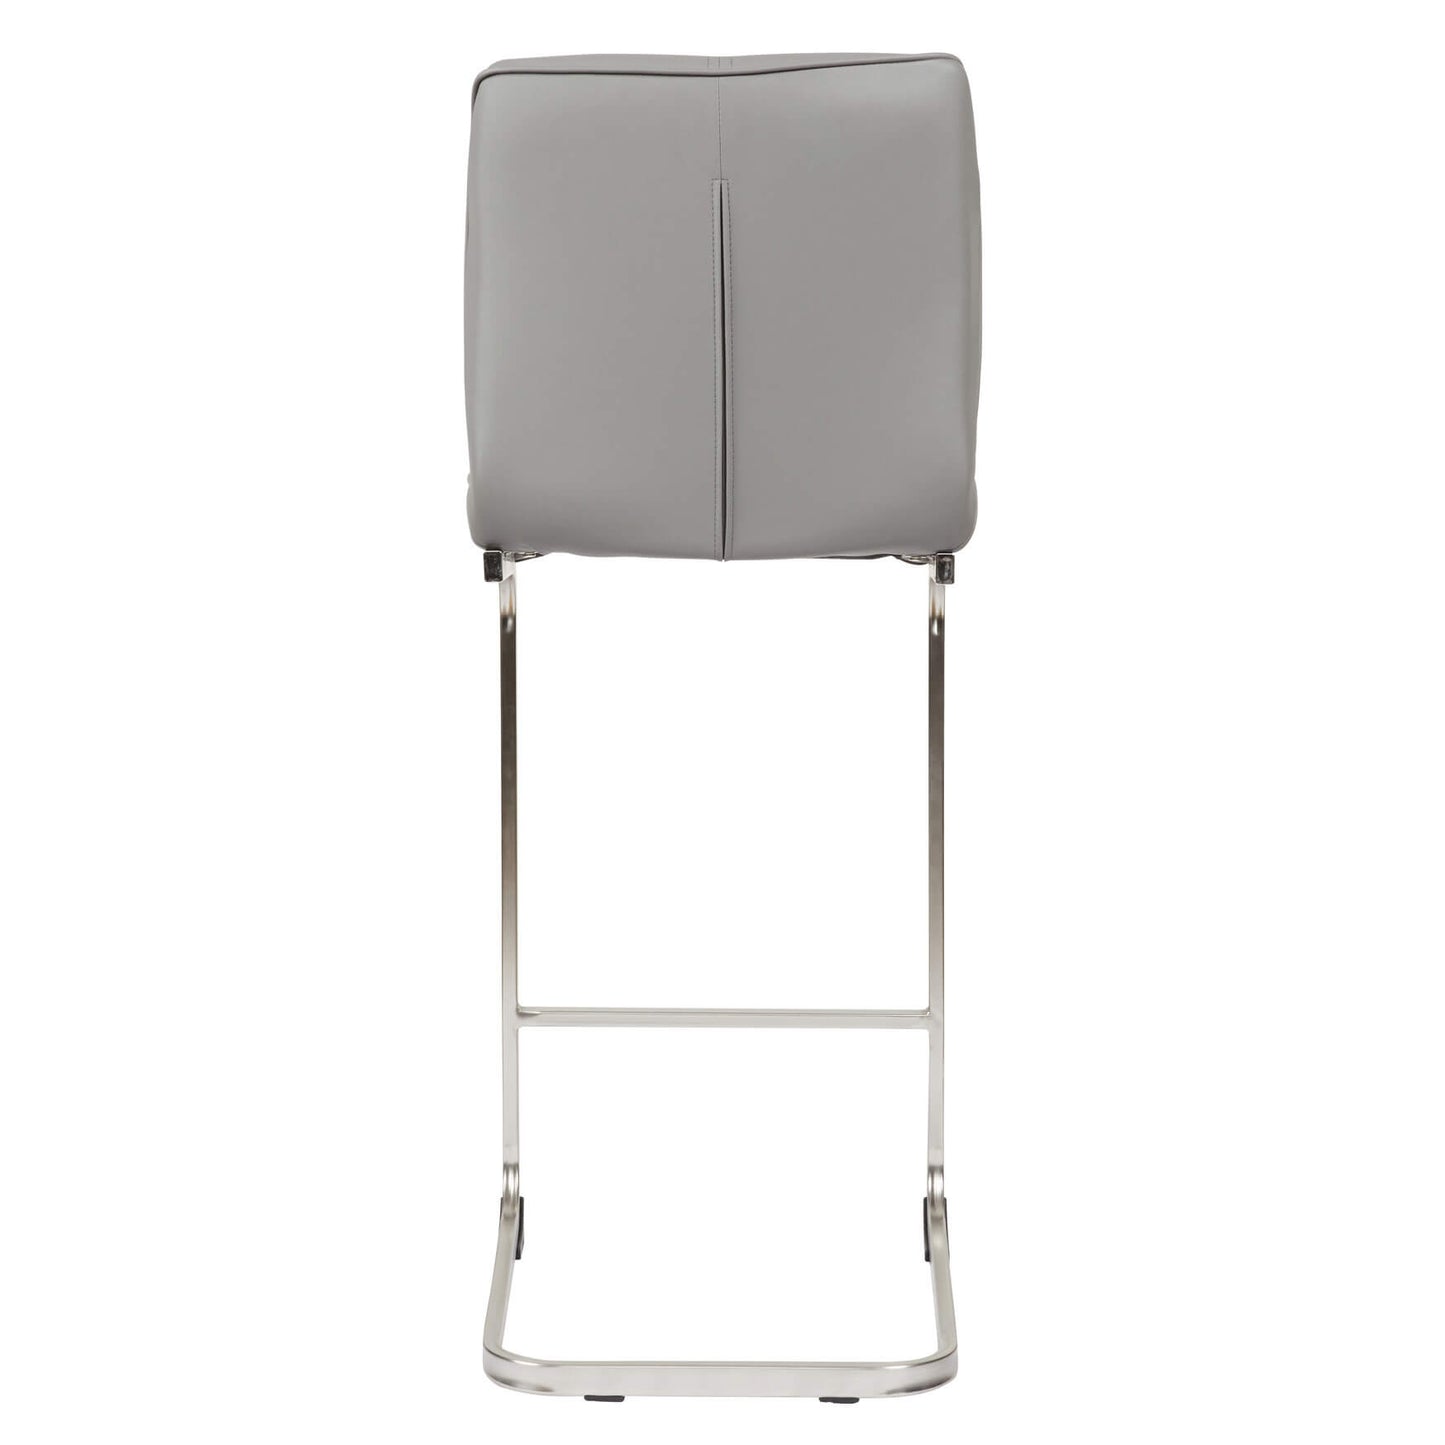 Lawry | Contemporary Metal PU Leather Bar Stools | Set Of 2 | Grey